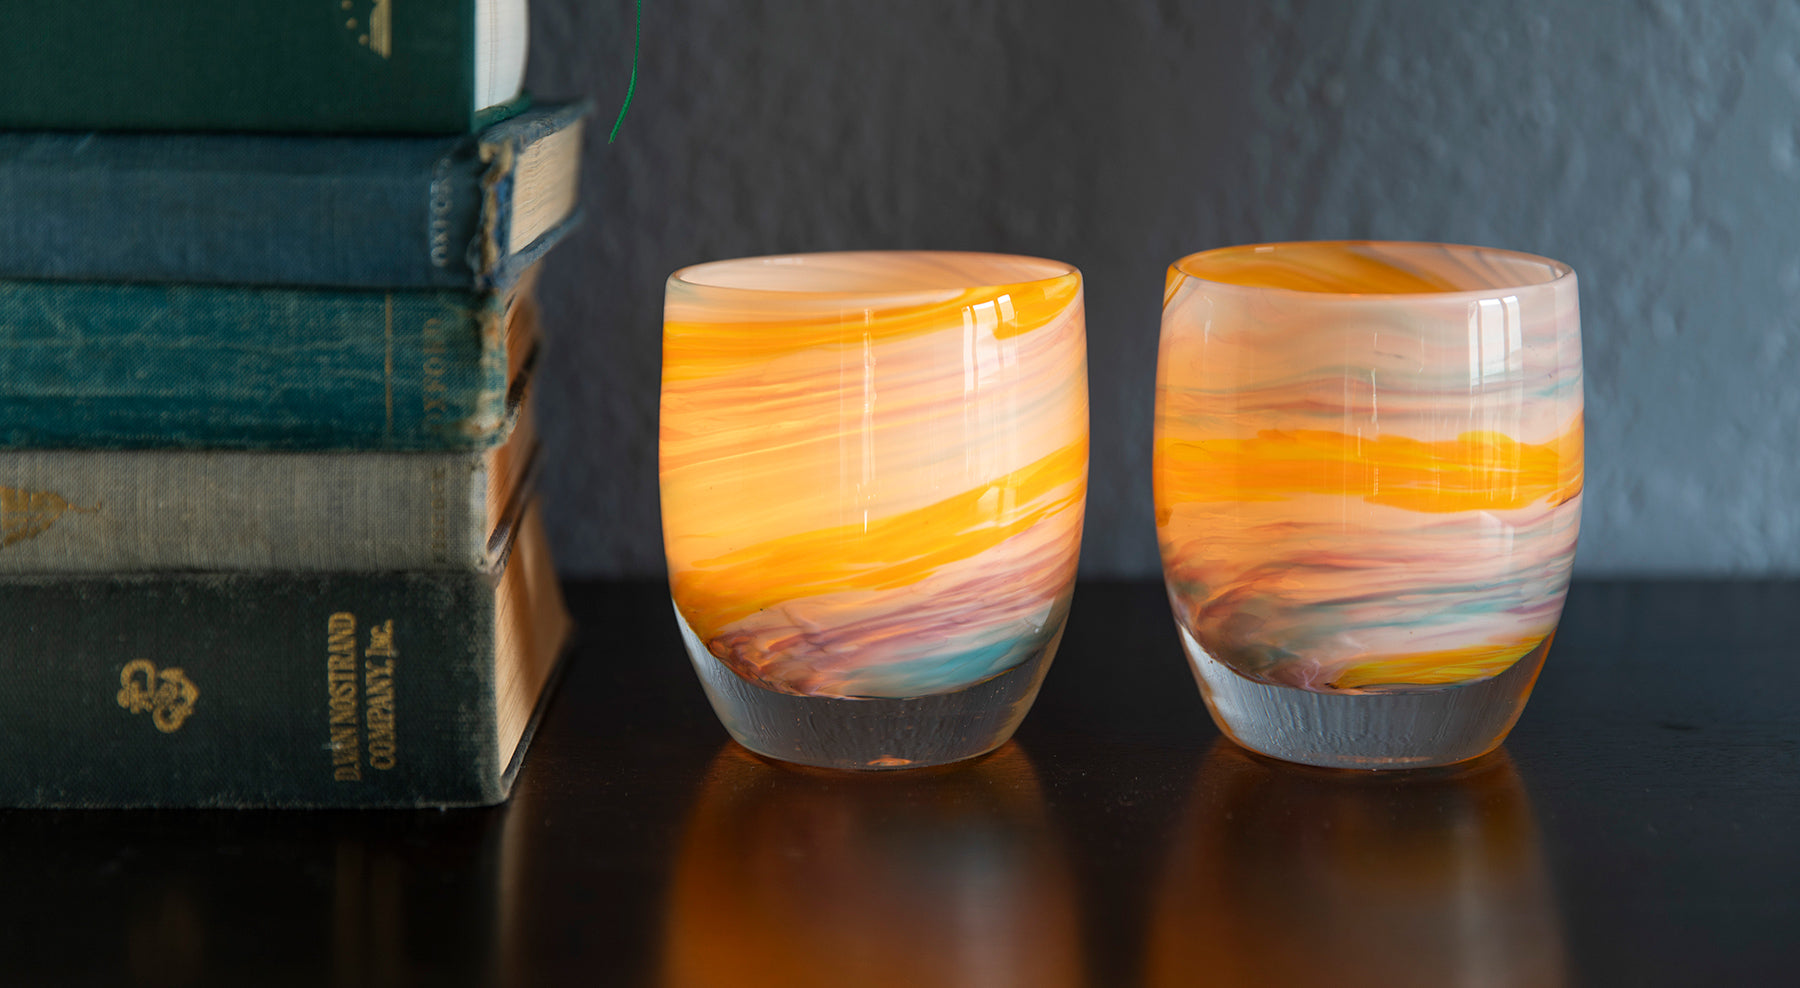 two places you'll go multi-colored yellow, white, purple, blue hand-blown glass votive candle holders sitting on a dark wood table with a stack of books.